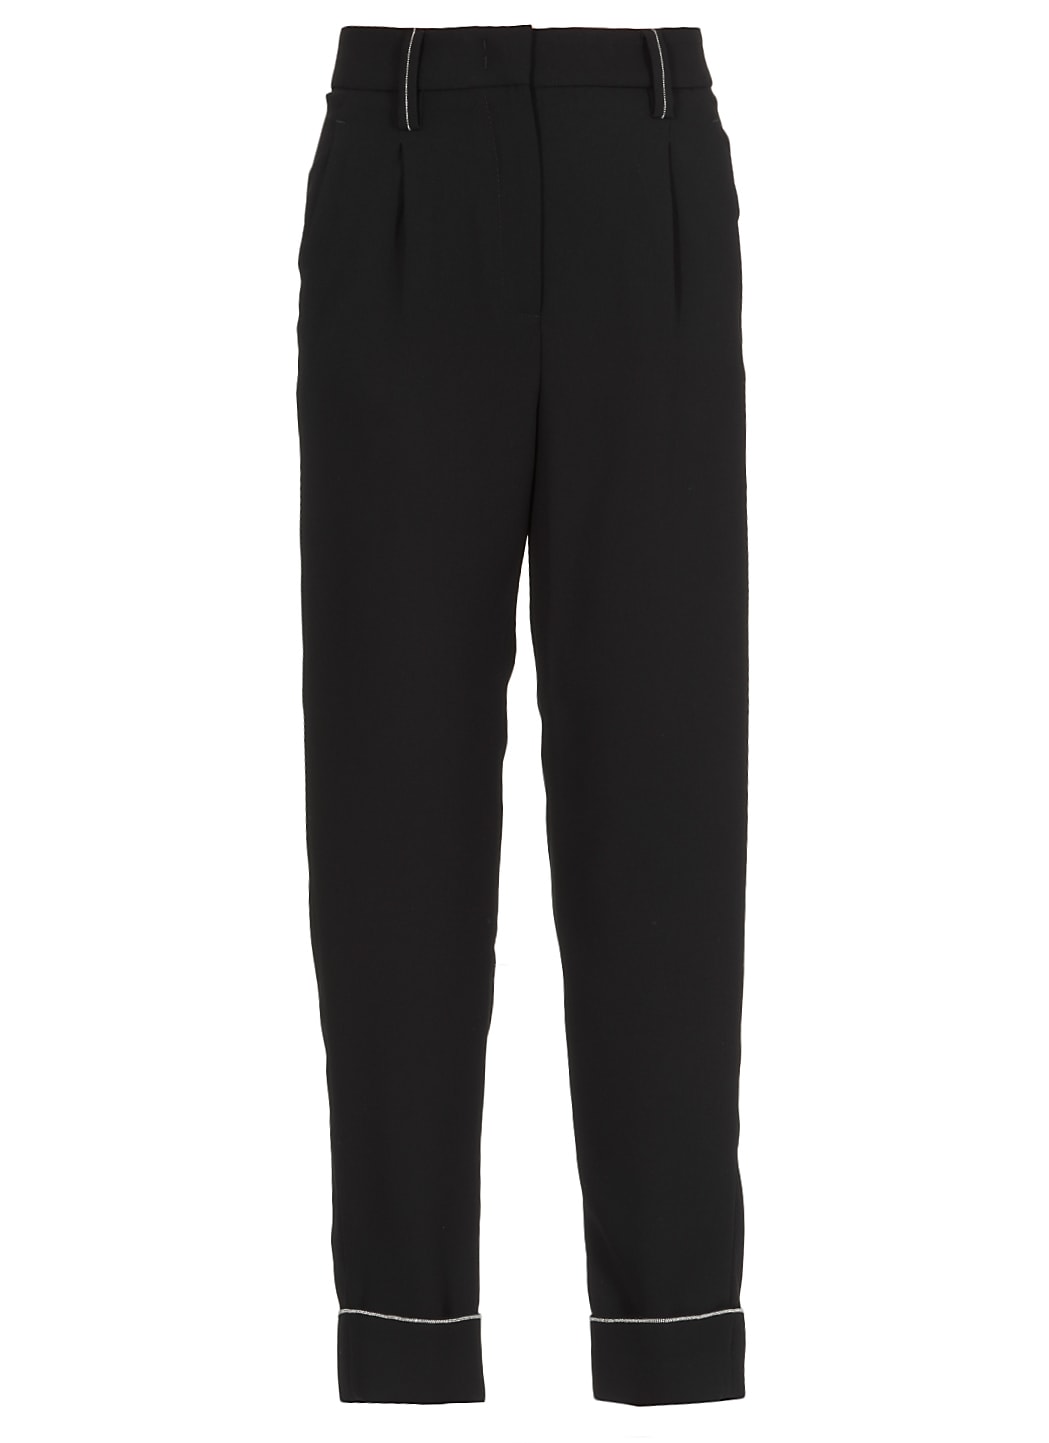 Peserico Tailored Trousers With Metallic Highlight Details